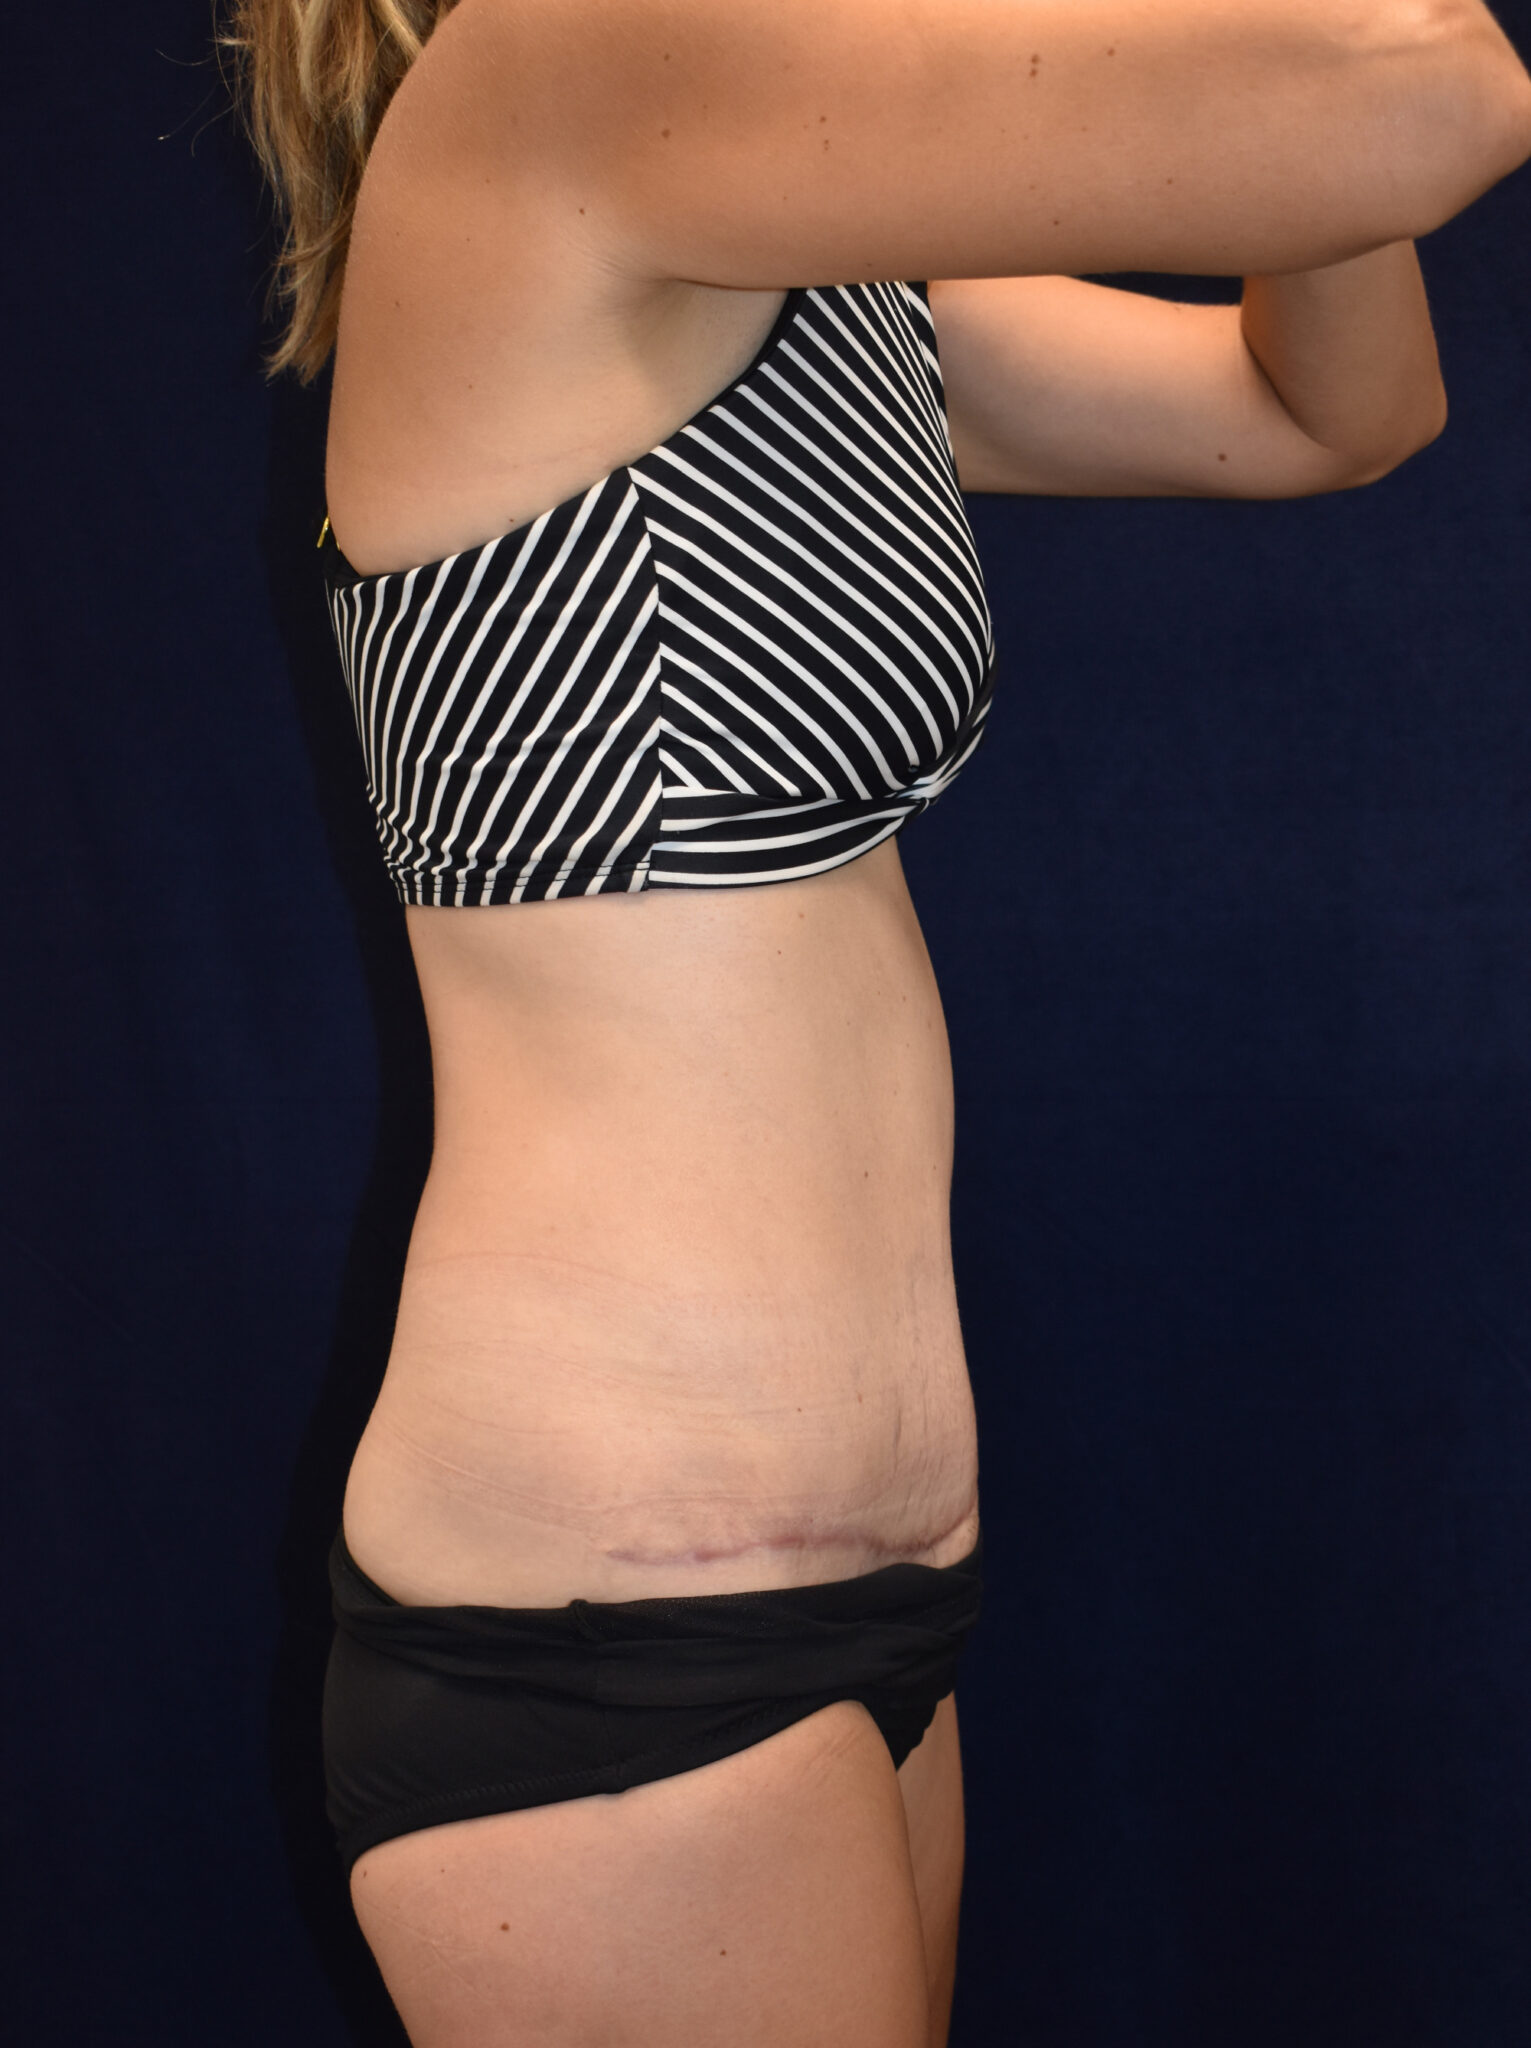 Abdominoplasty (Tummy Tuck) Patient Photo - Case 2621 - after view-1